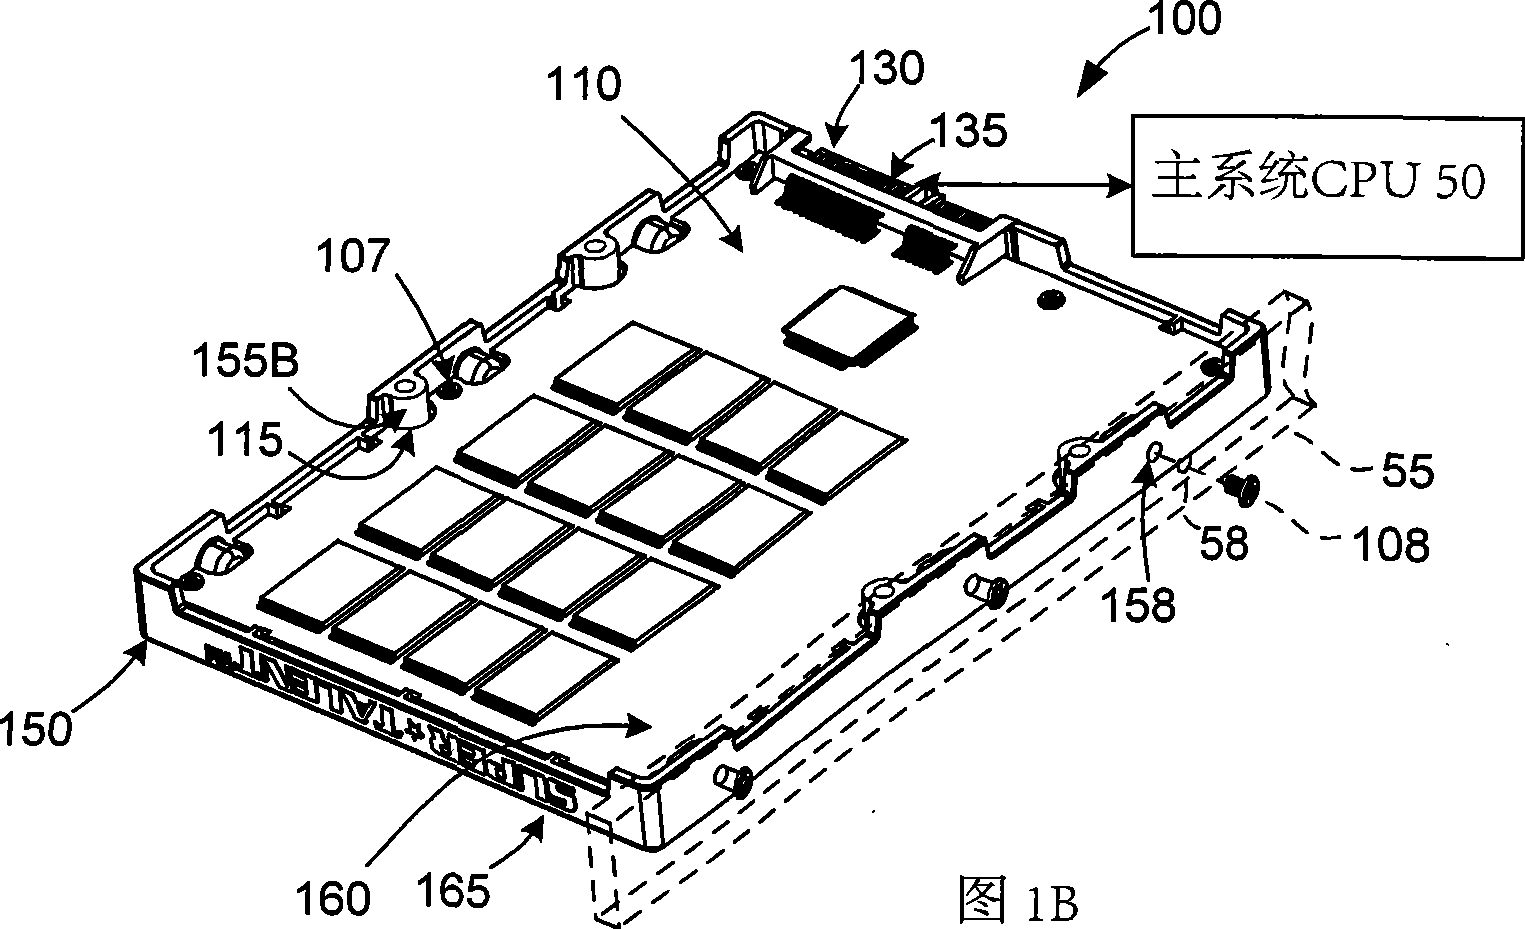 Solid state drive (ssd) with open top and bottom covers